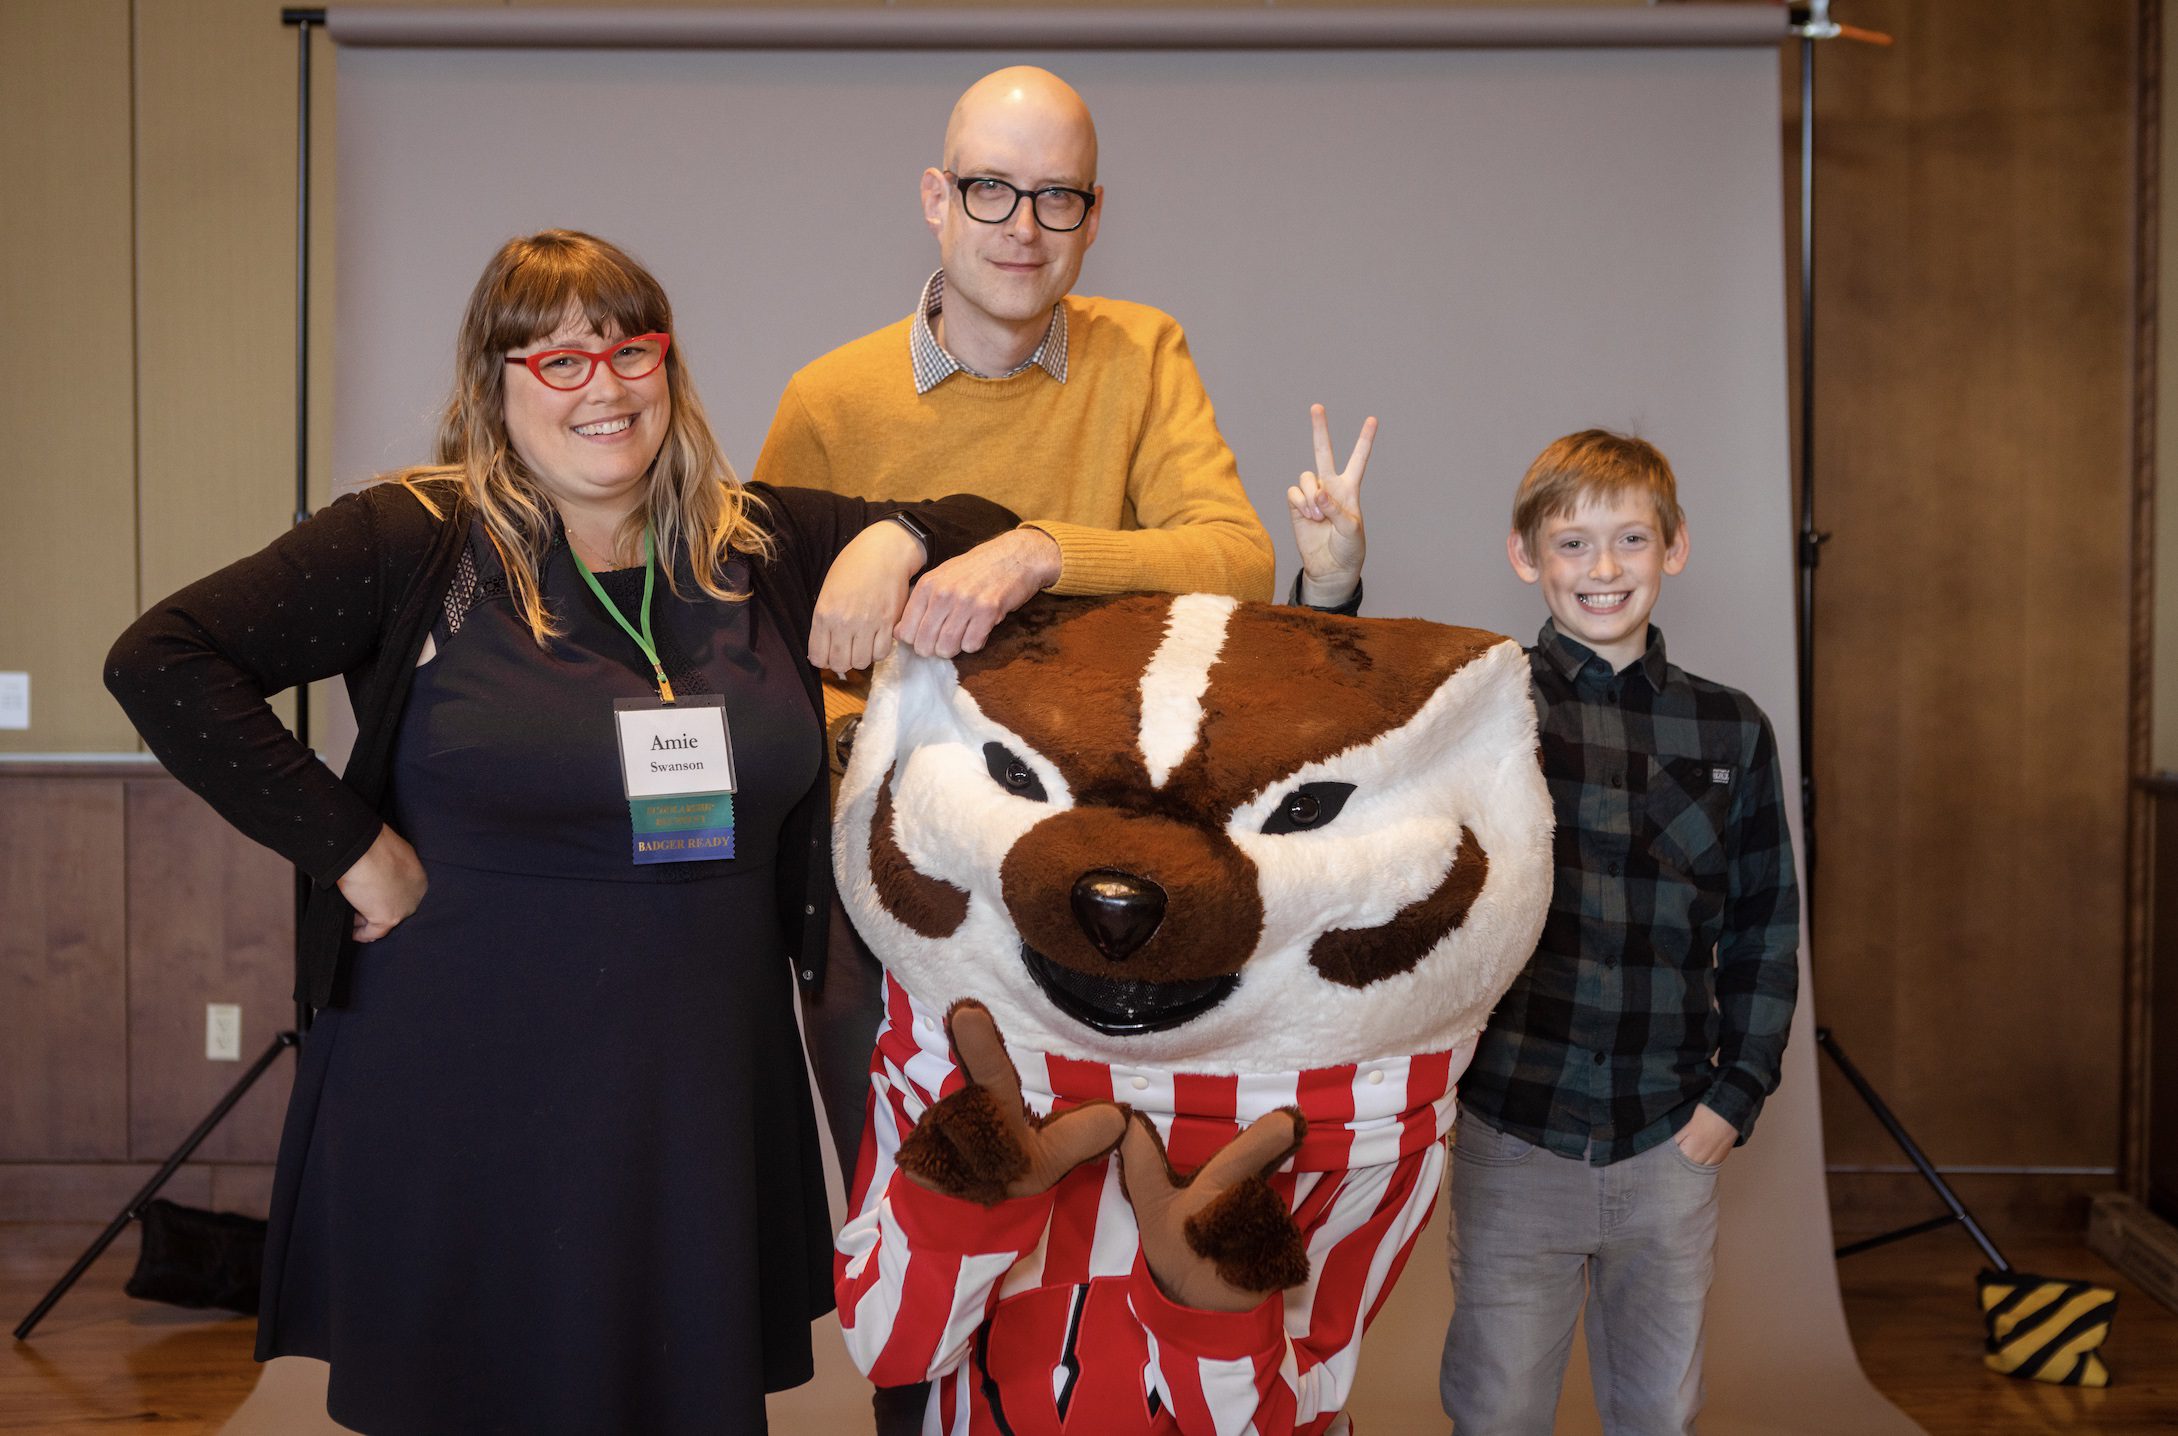 A wife, husband and their son posing with Bucky the Badger